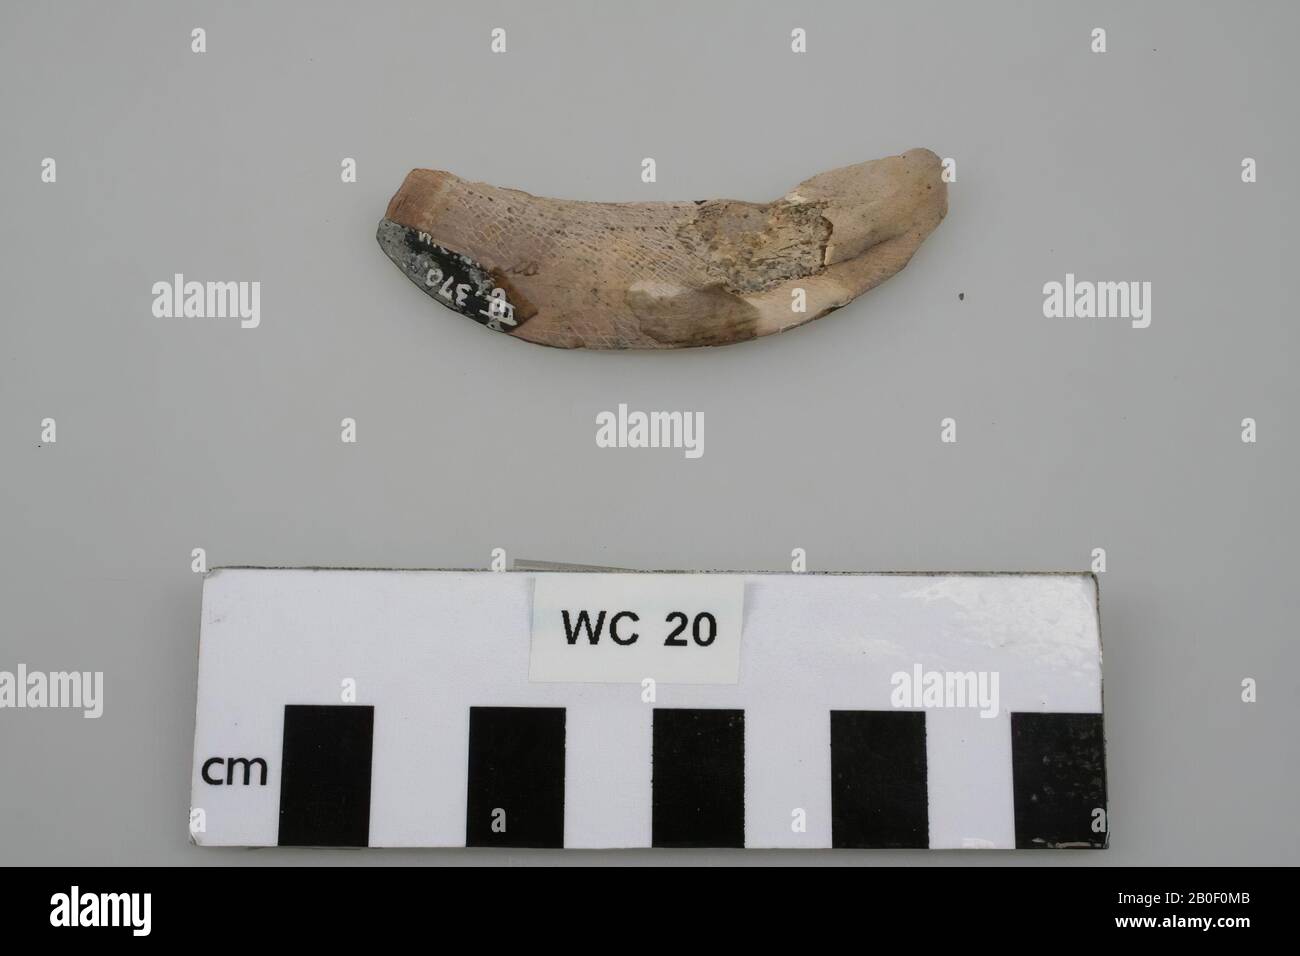 Flat, sickle-shaped plate of bone (tooth?)., Fragment, organic, bone, 7 x 3 x 1.5 cm, Germany, unknown, unknown, cheeks Stock Photo